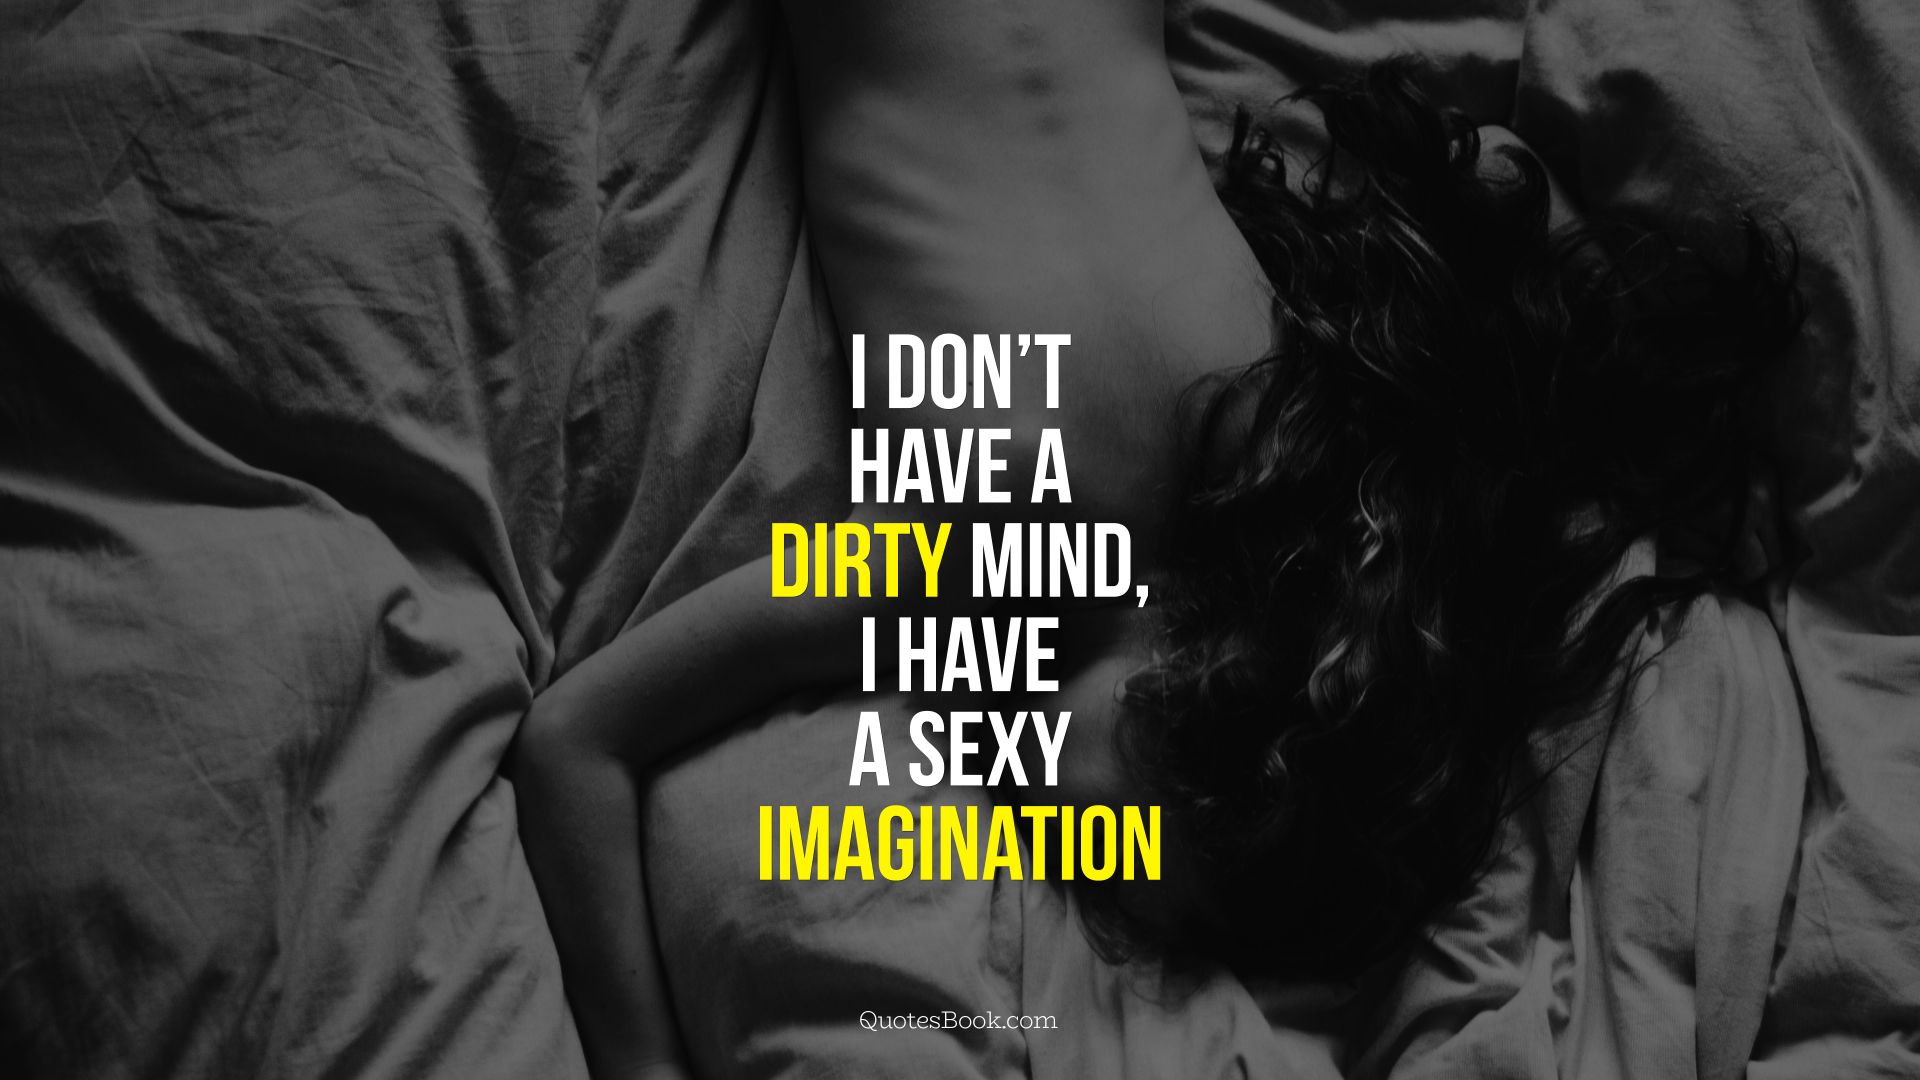 I don't have a dirty mind, I have sexy imagination - Page 5 - QuotesBook